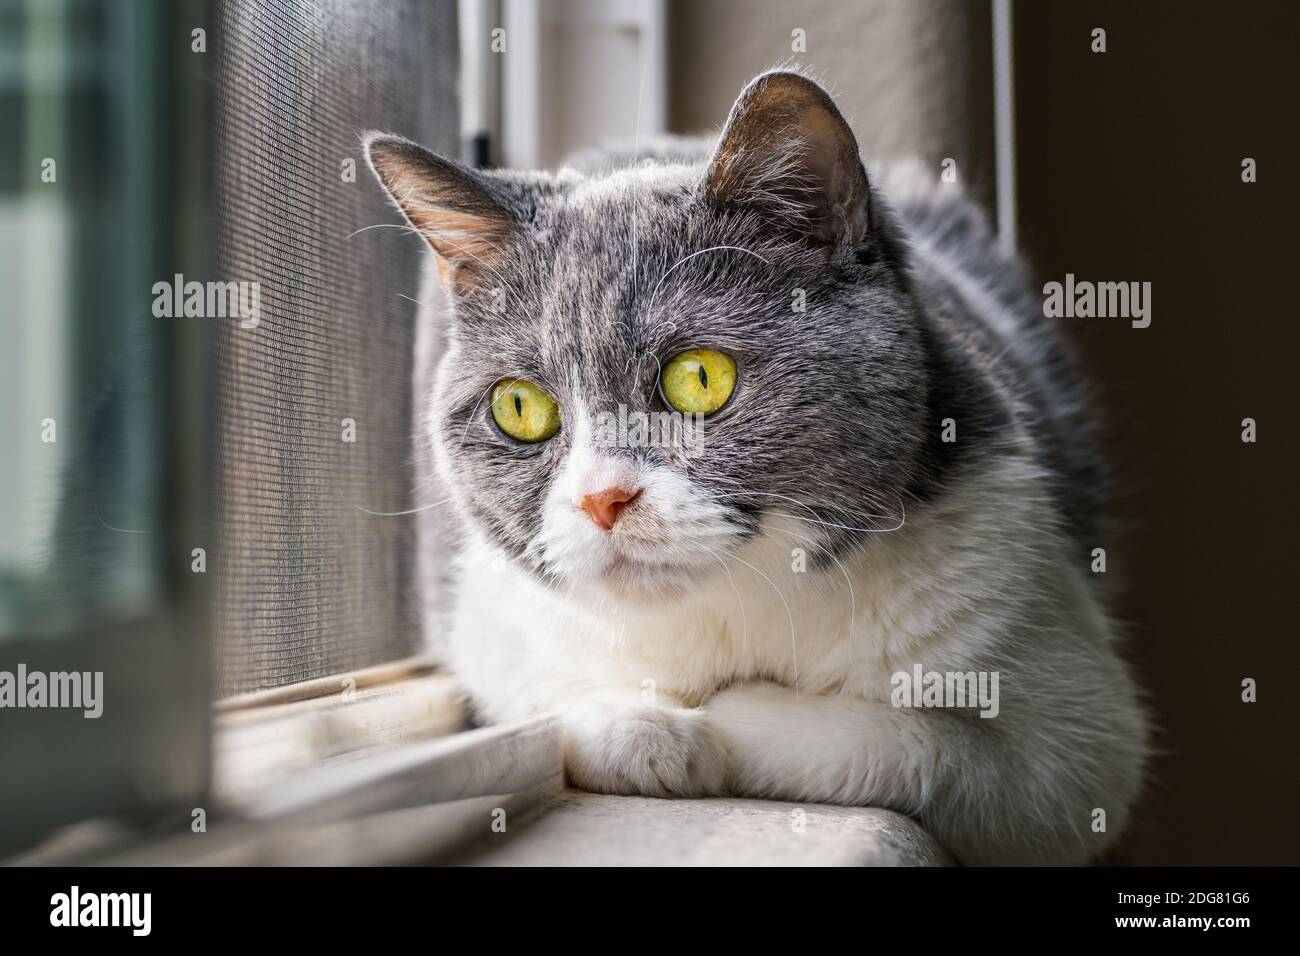 Close up of small gray and white cat with green eyes sitting on the windowsill and looking curiously outside Stock Photo